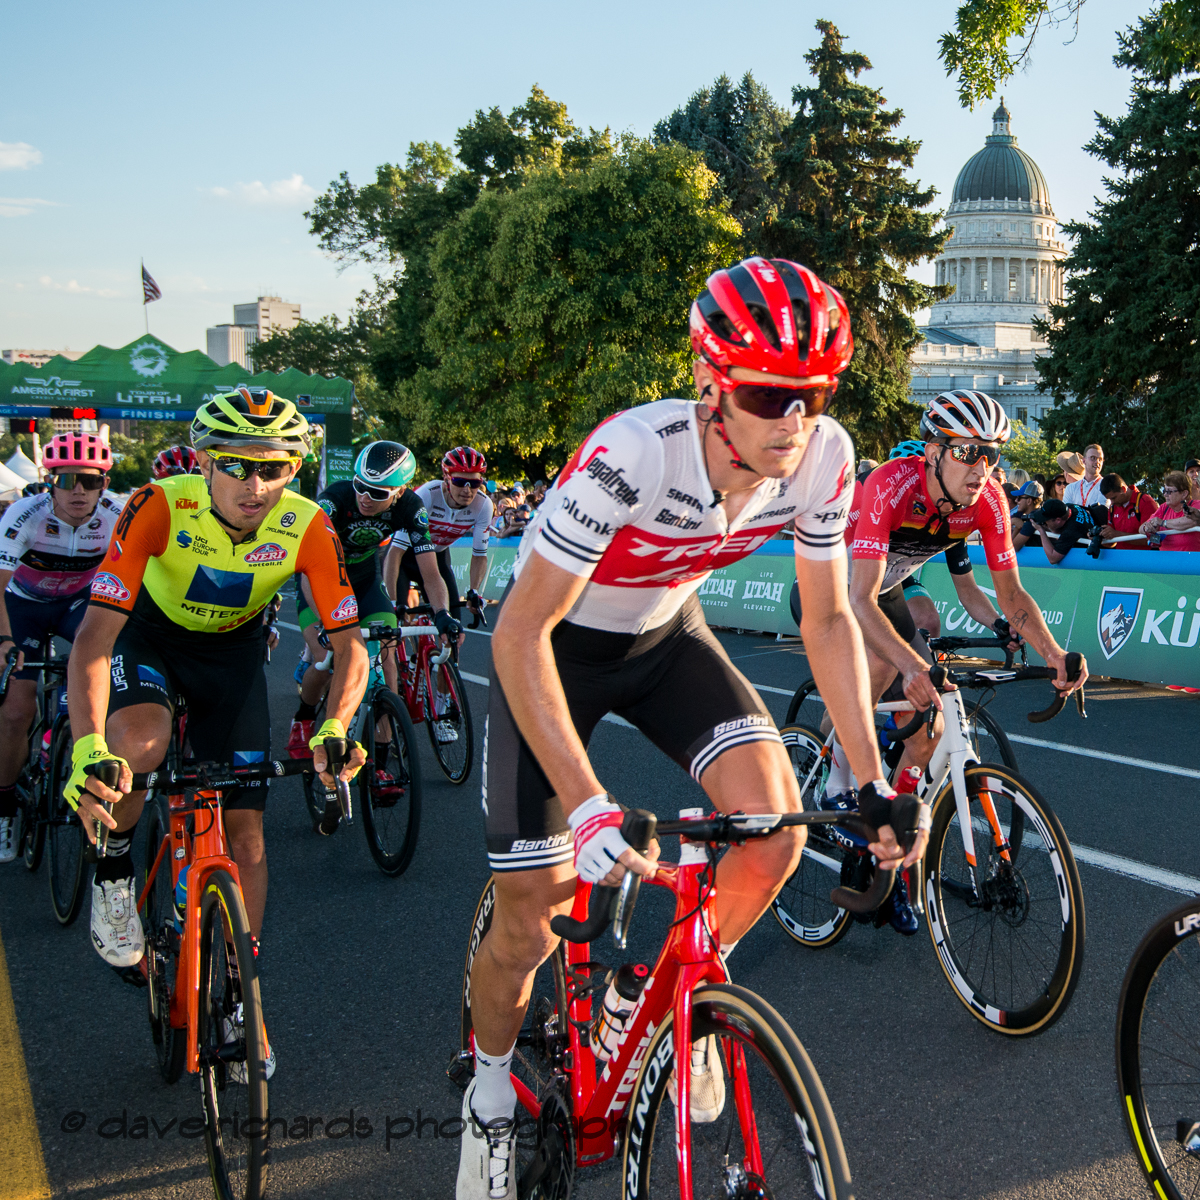 The peloton rolls through the start/finish line during one of the circuits on Stage 4 - Salt Lake City Circuit Race, 2019 LHM Tour of Utah (Photo by Dave Richards, daverphoto.com)